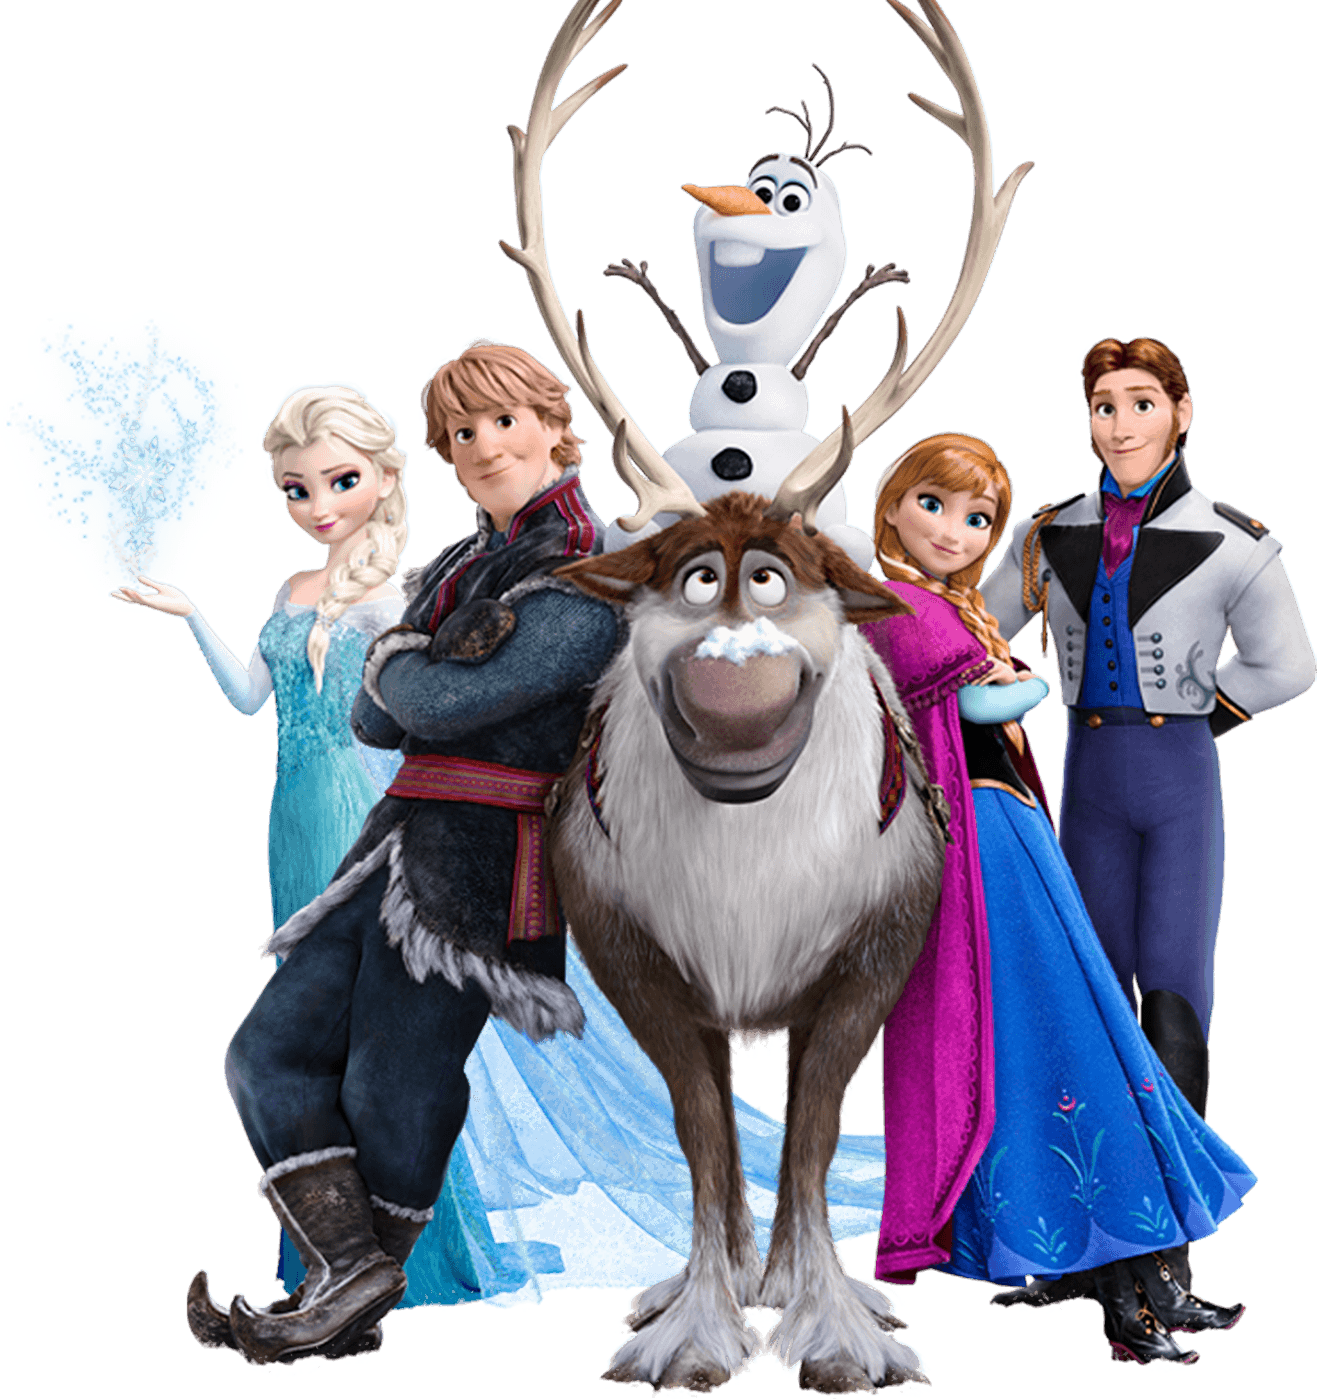 Download Frozen Characters PNG Image High Quality HQ PNG Image FreePNGImg.